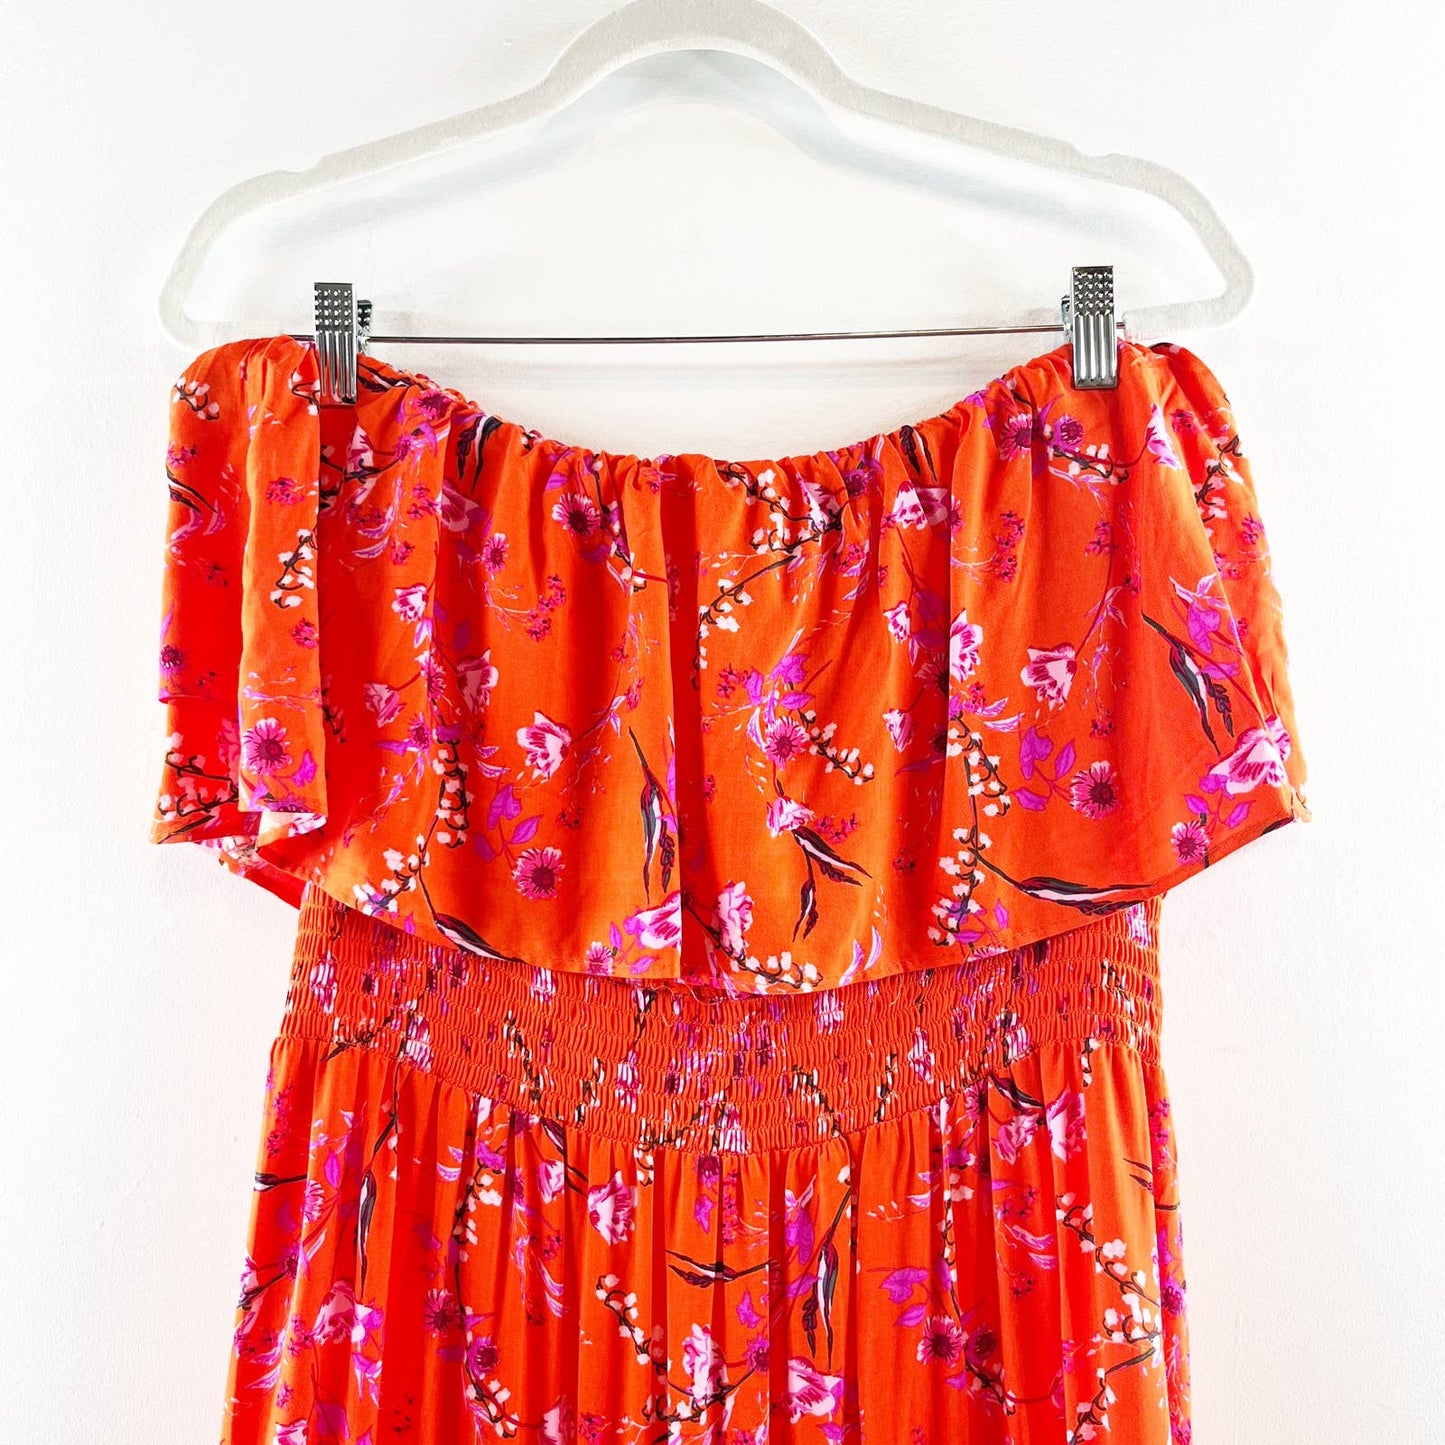 1. State Floral Strapless Ruffle Tiered Midi Dress Orange Red XL